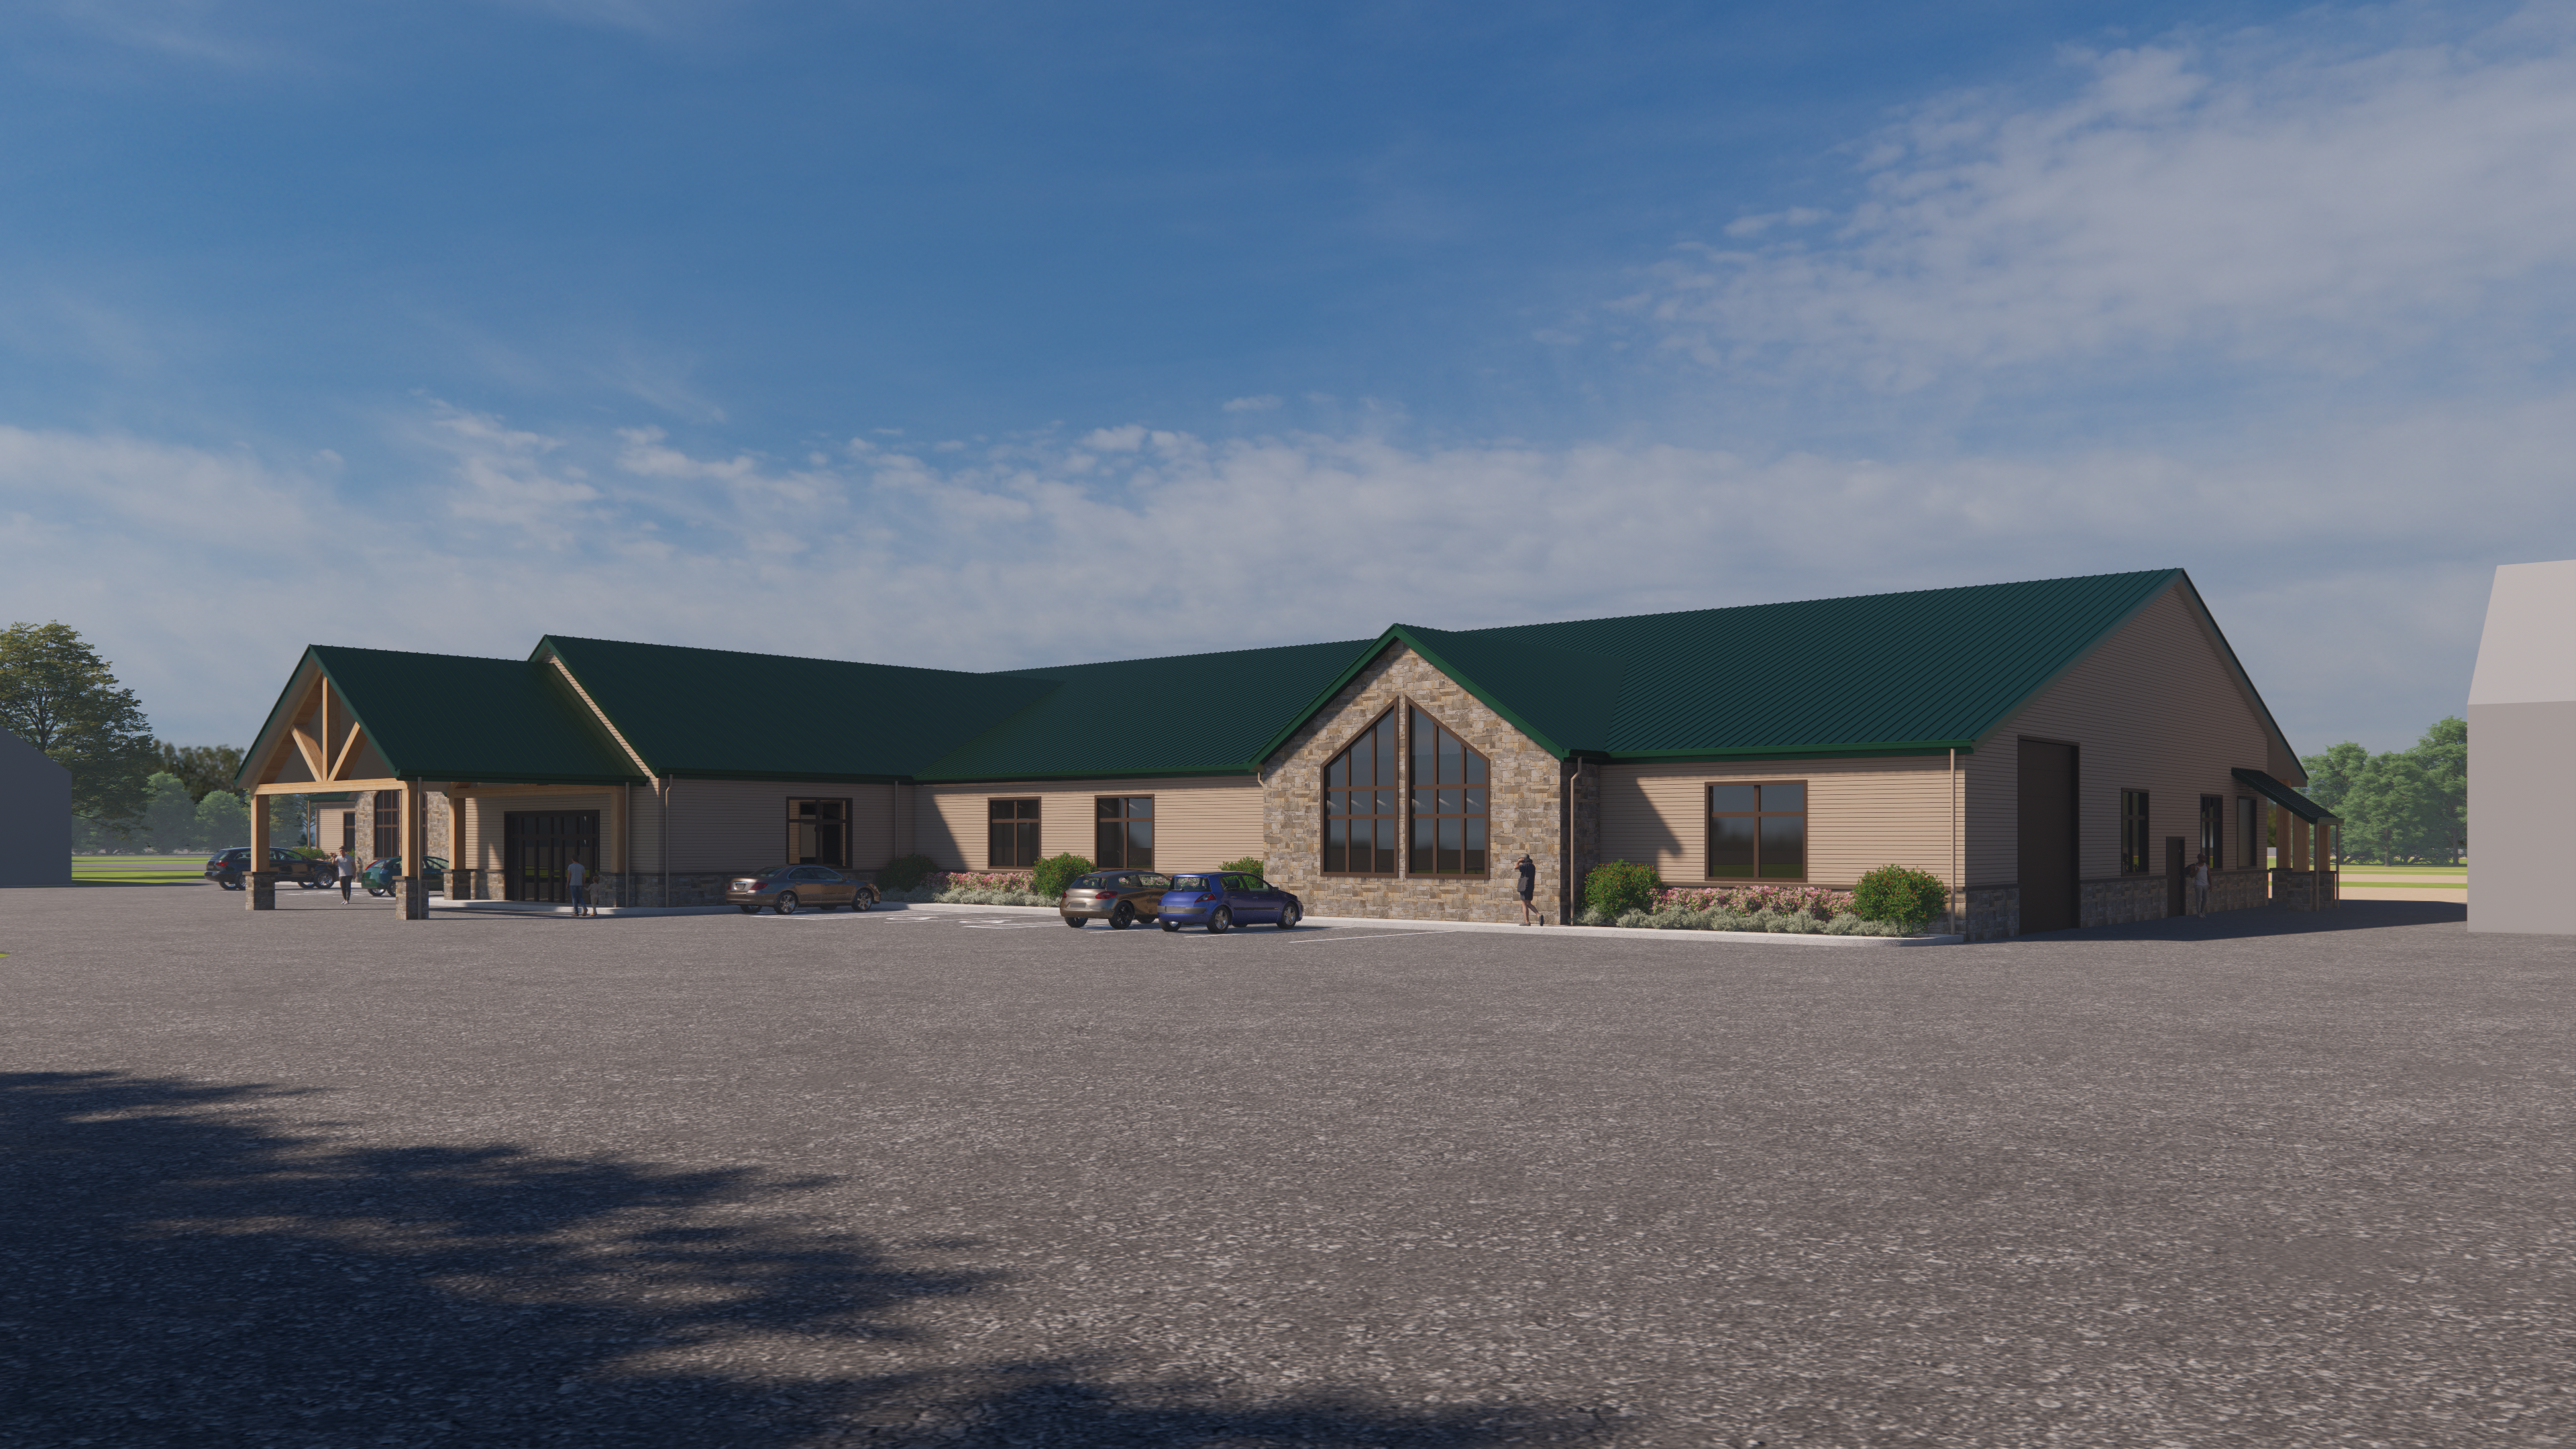 New building wouldn't take away parking or campsites, will 'open up opportunities' for Ashland